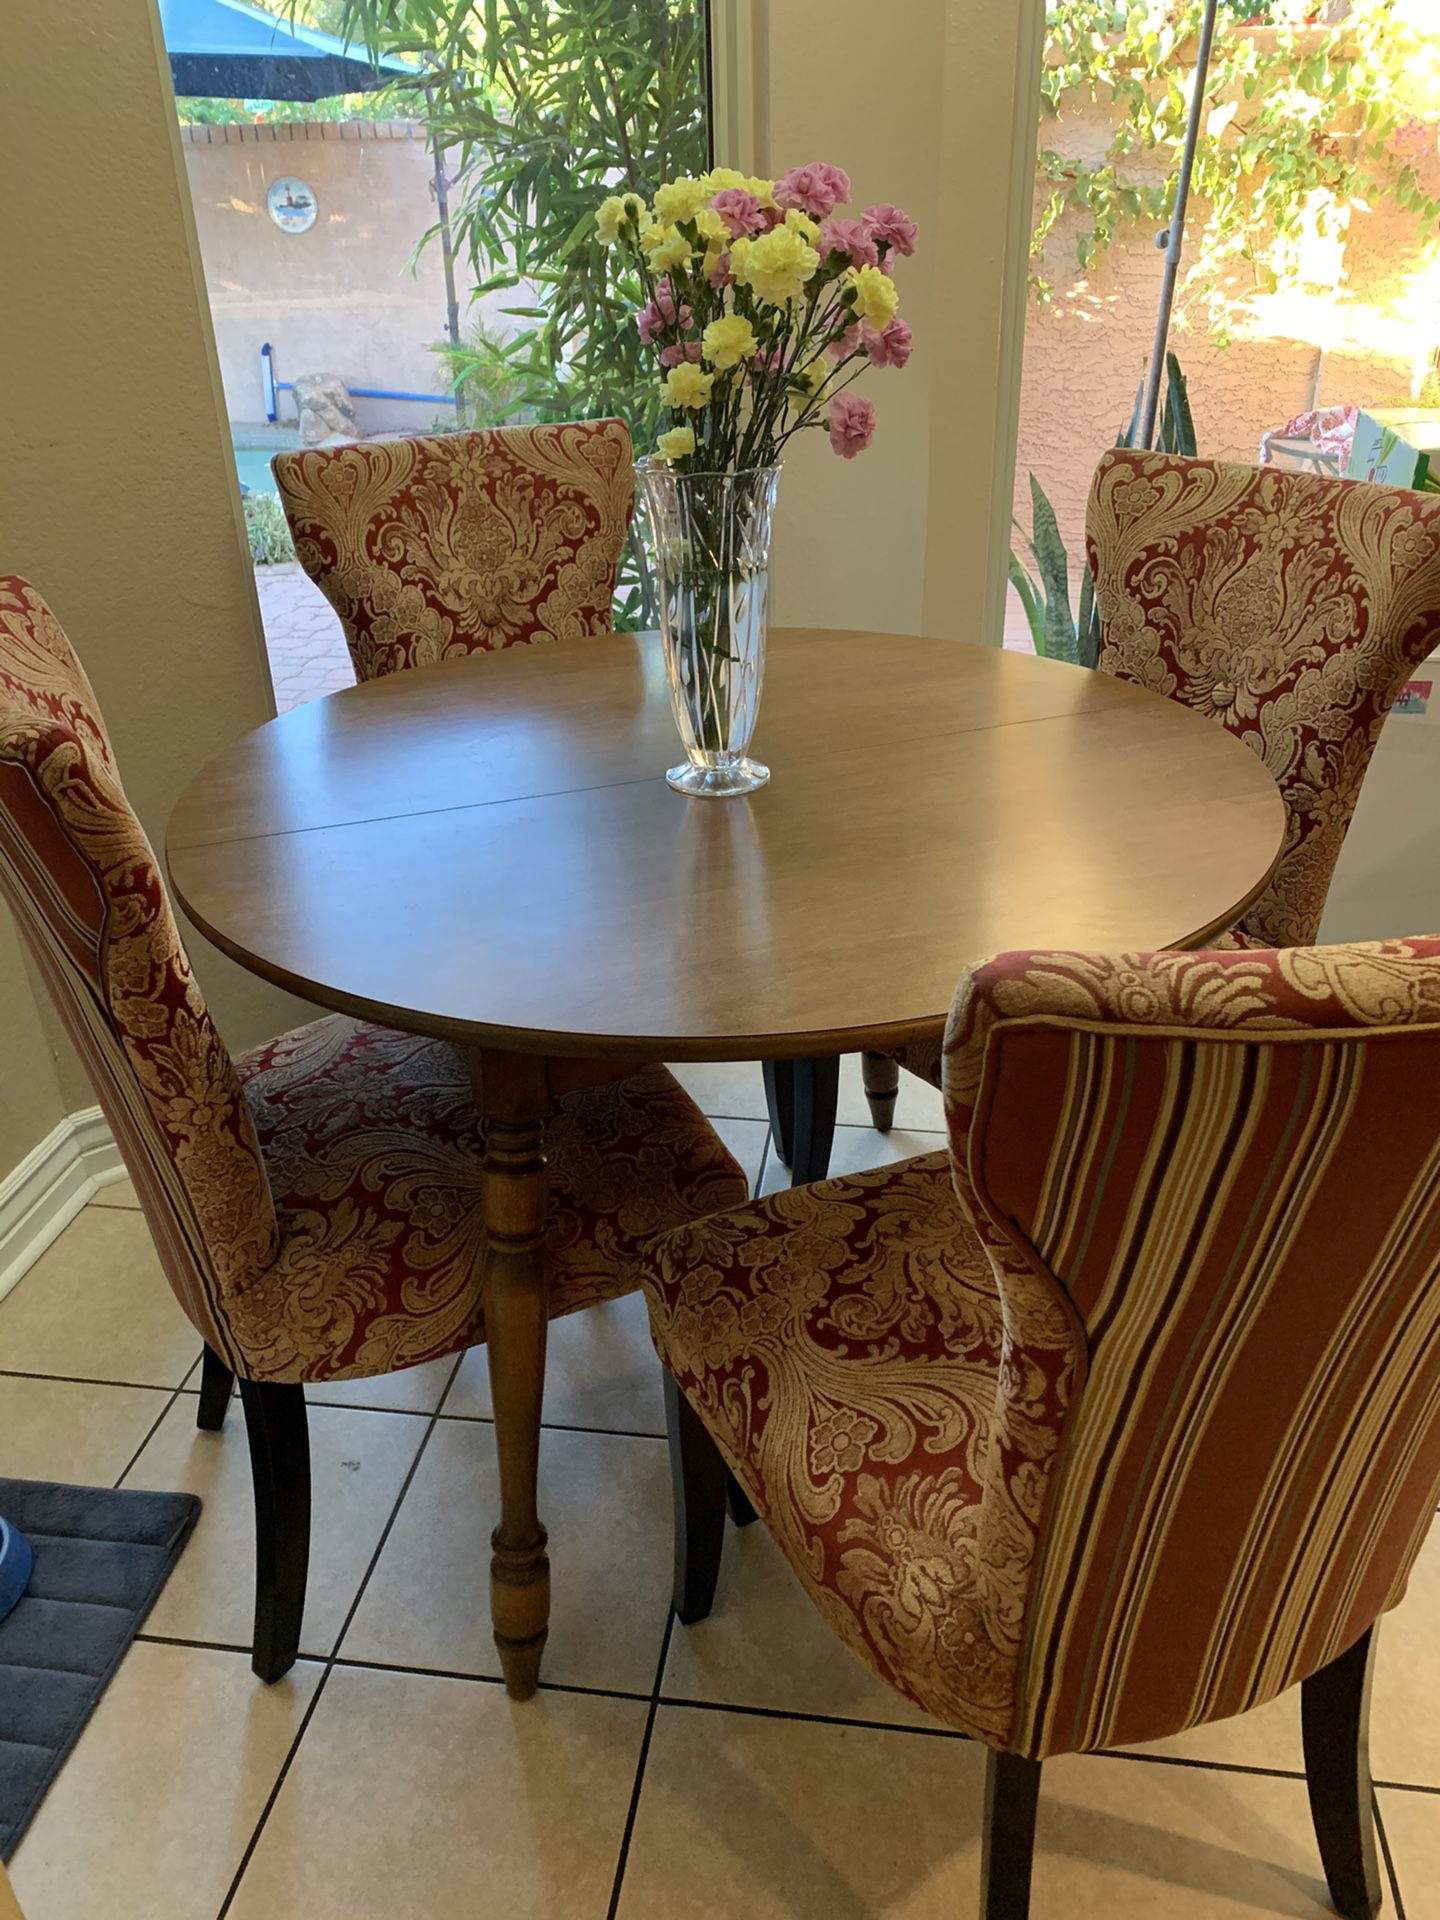 Kitchen table and 4 chairs. table leaf